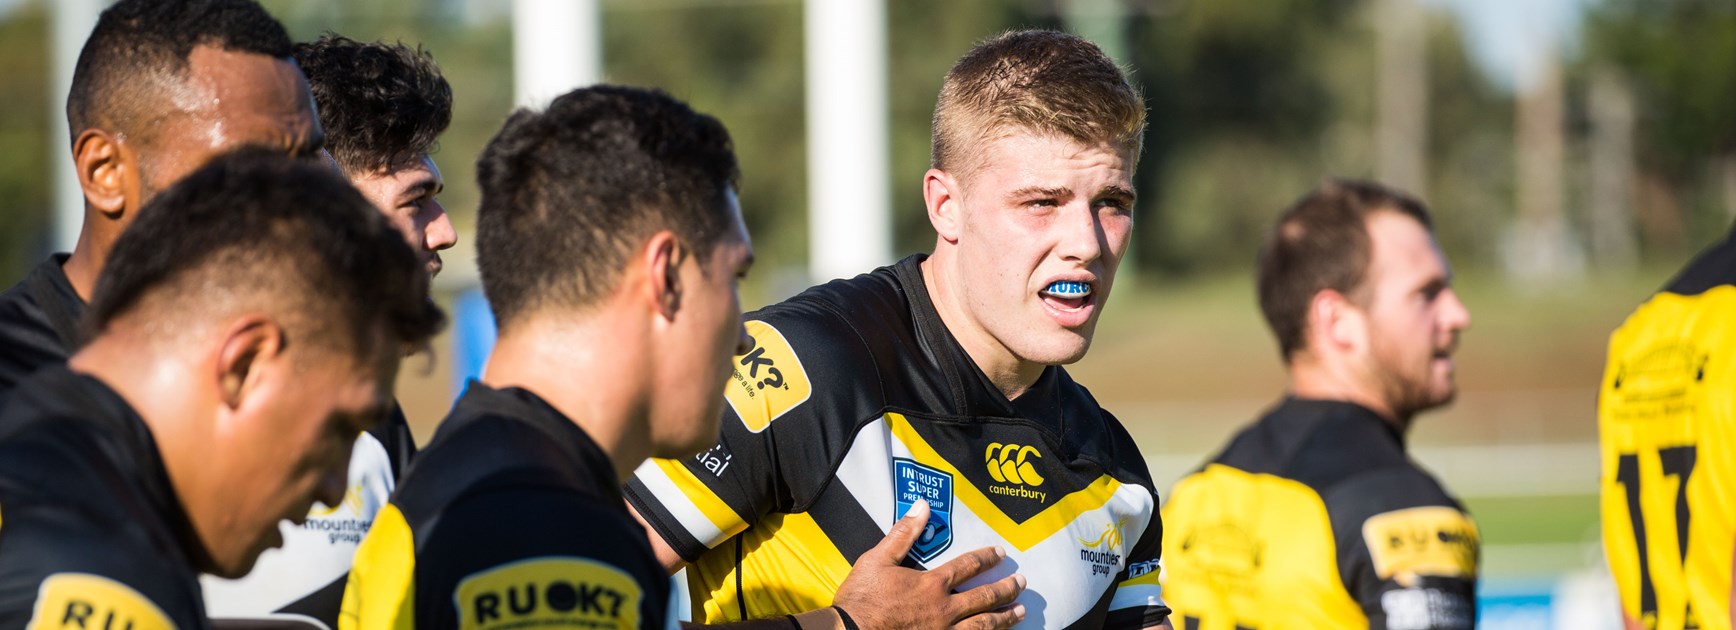 Debutant Watch | Murchie To Make Debut For Raiders